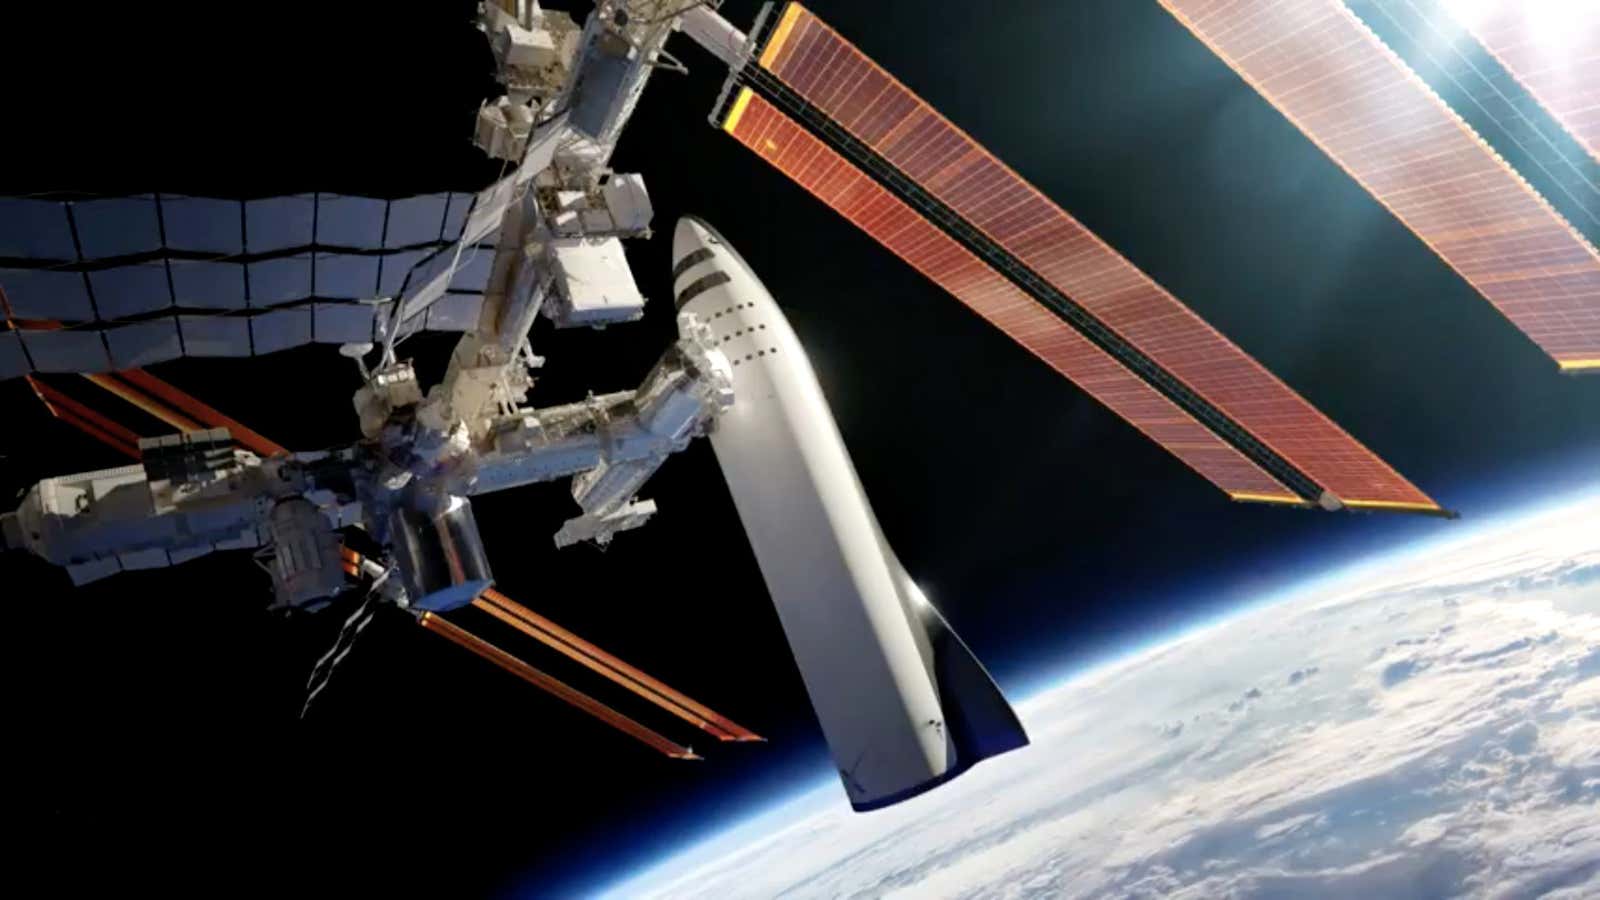 SpaceX’s “BFR” space vehicle is shown docked with the International Space Station in this rendering.